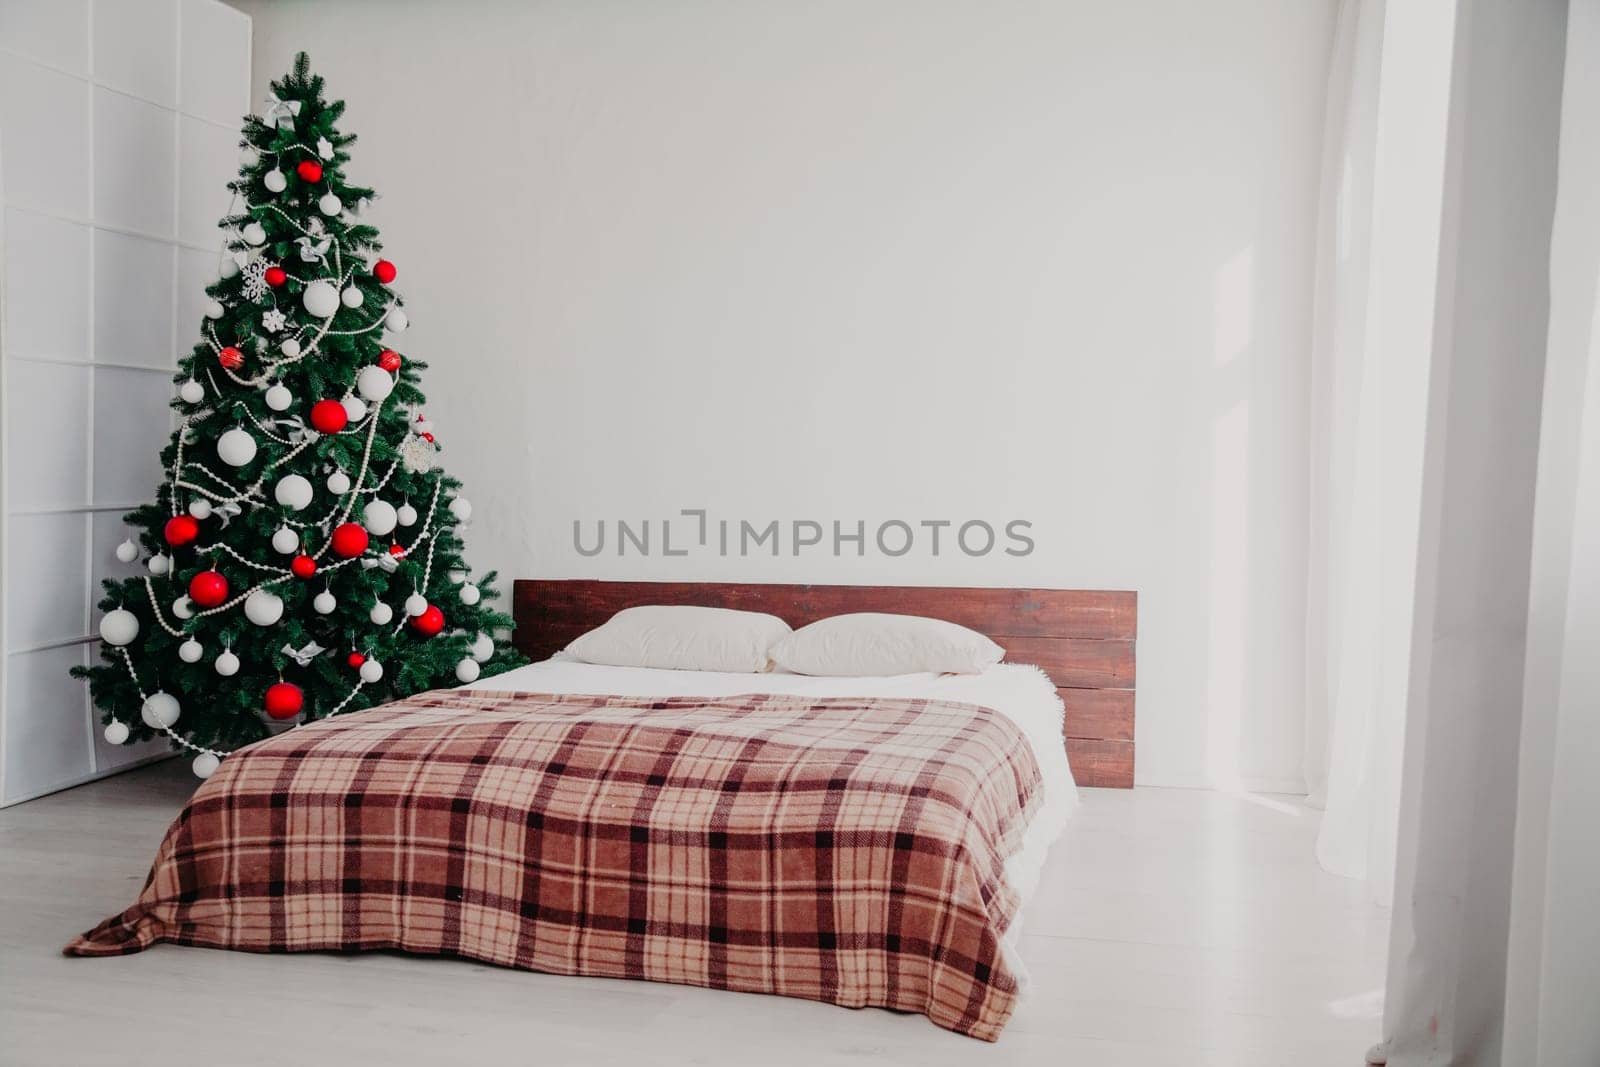 Interior bedroom with bed and Christmas tree new year holidays gifts by Simakov